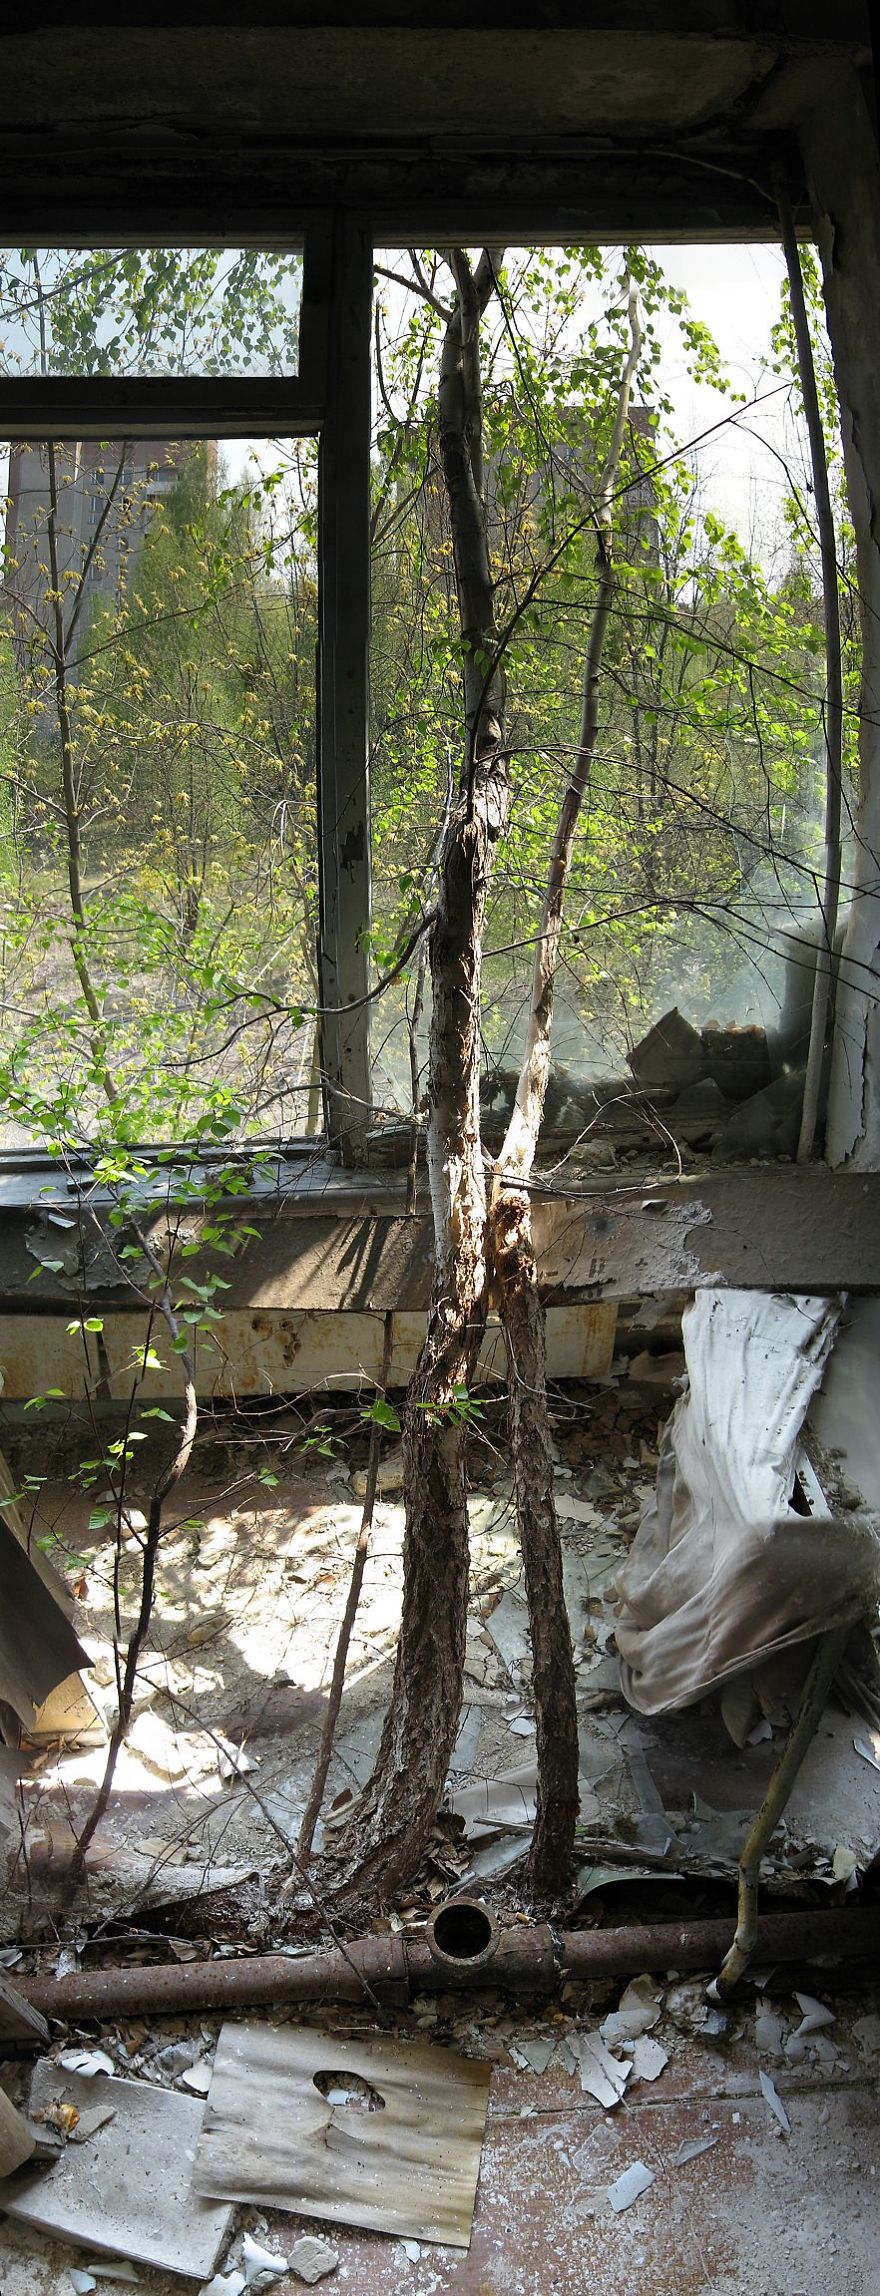 Life In Chernobyl After The Accident: Nature Wins The Battle Against Civilization